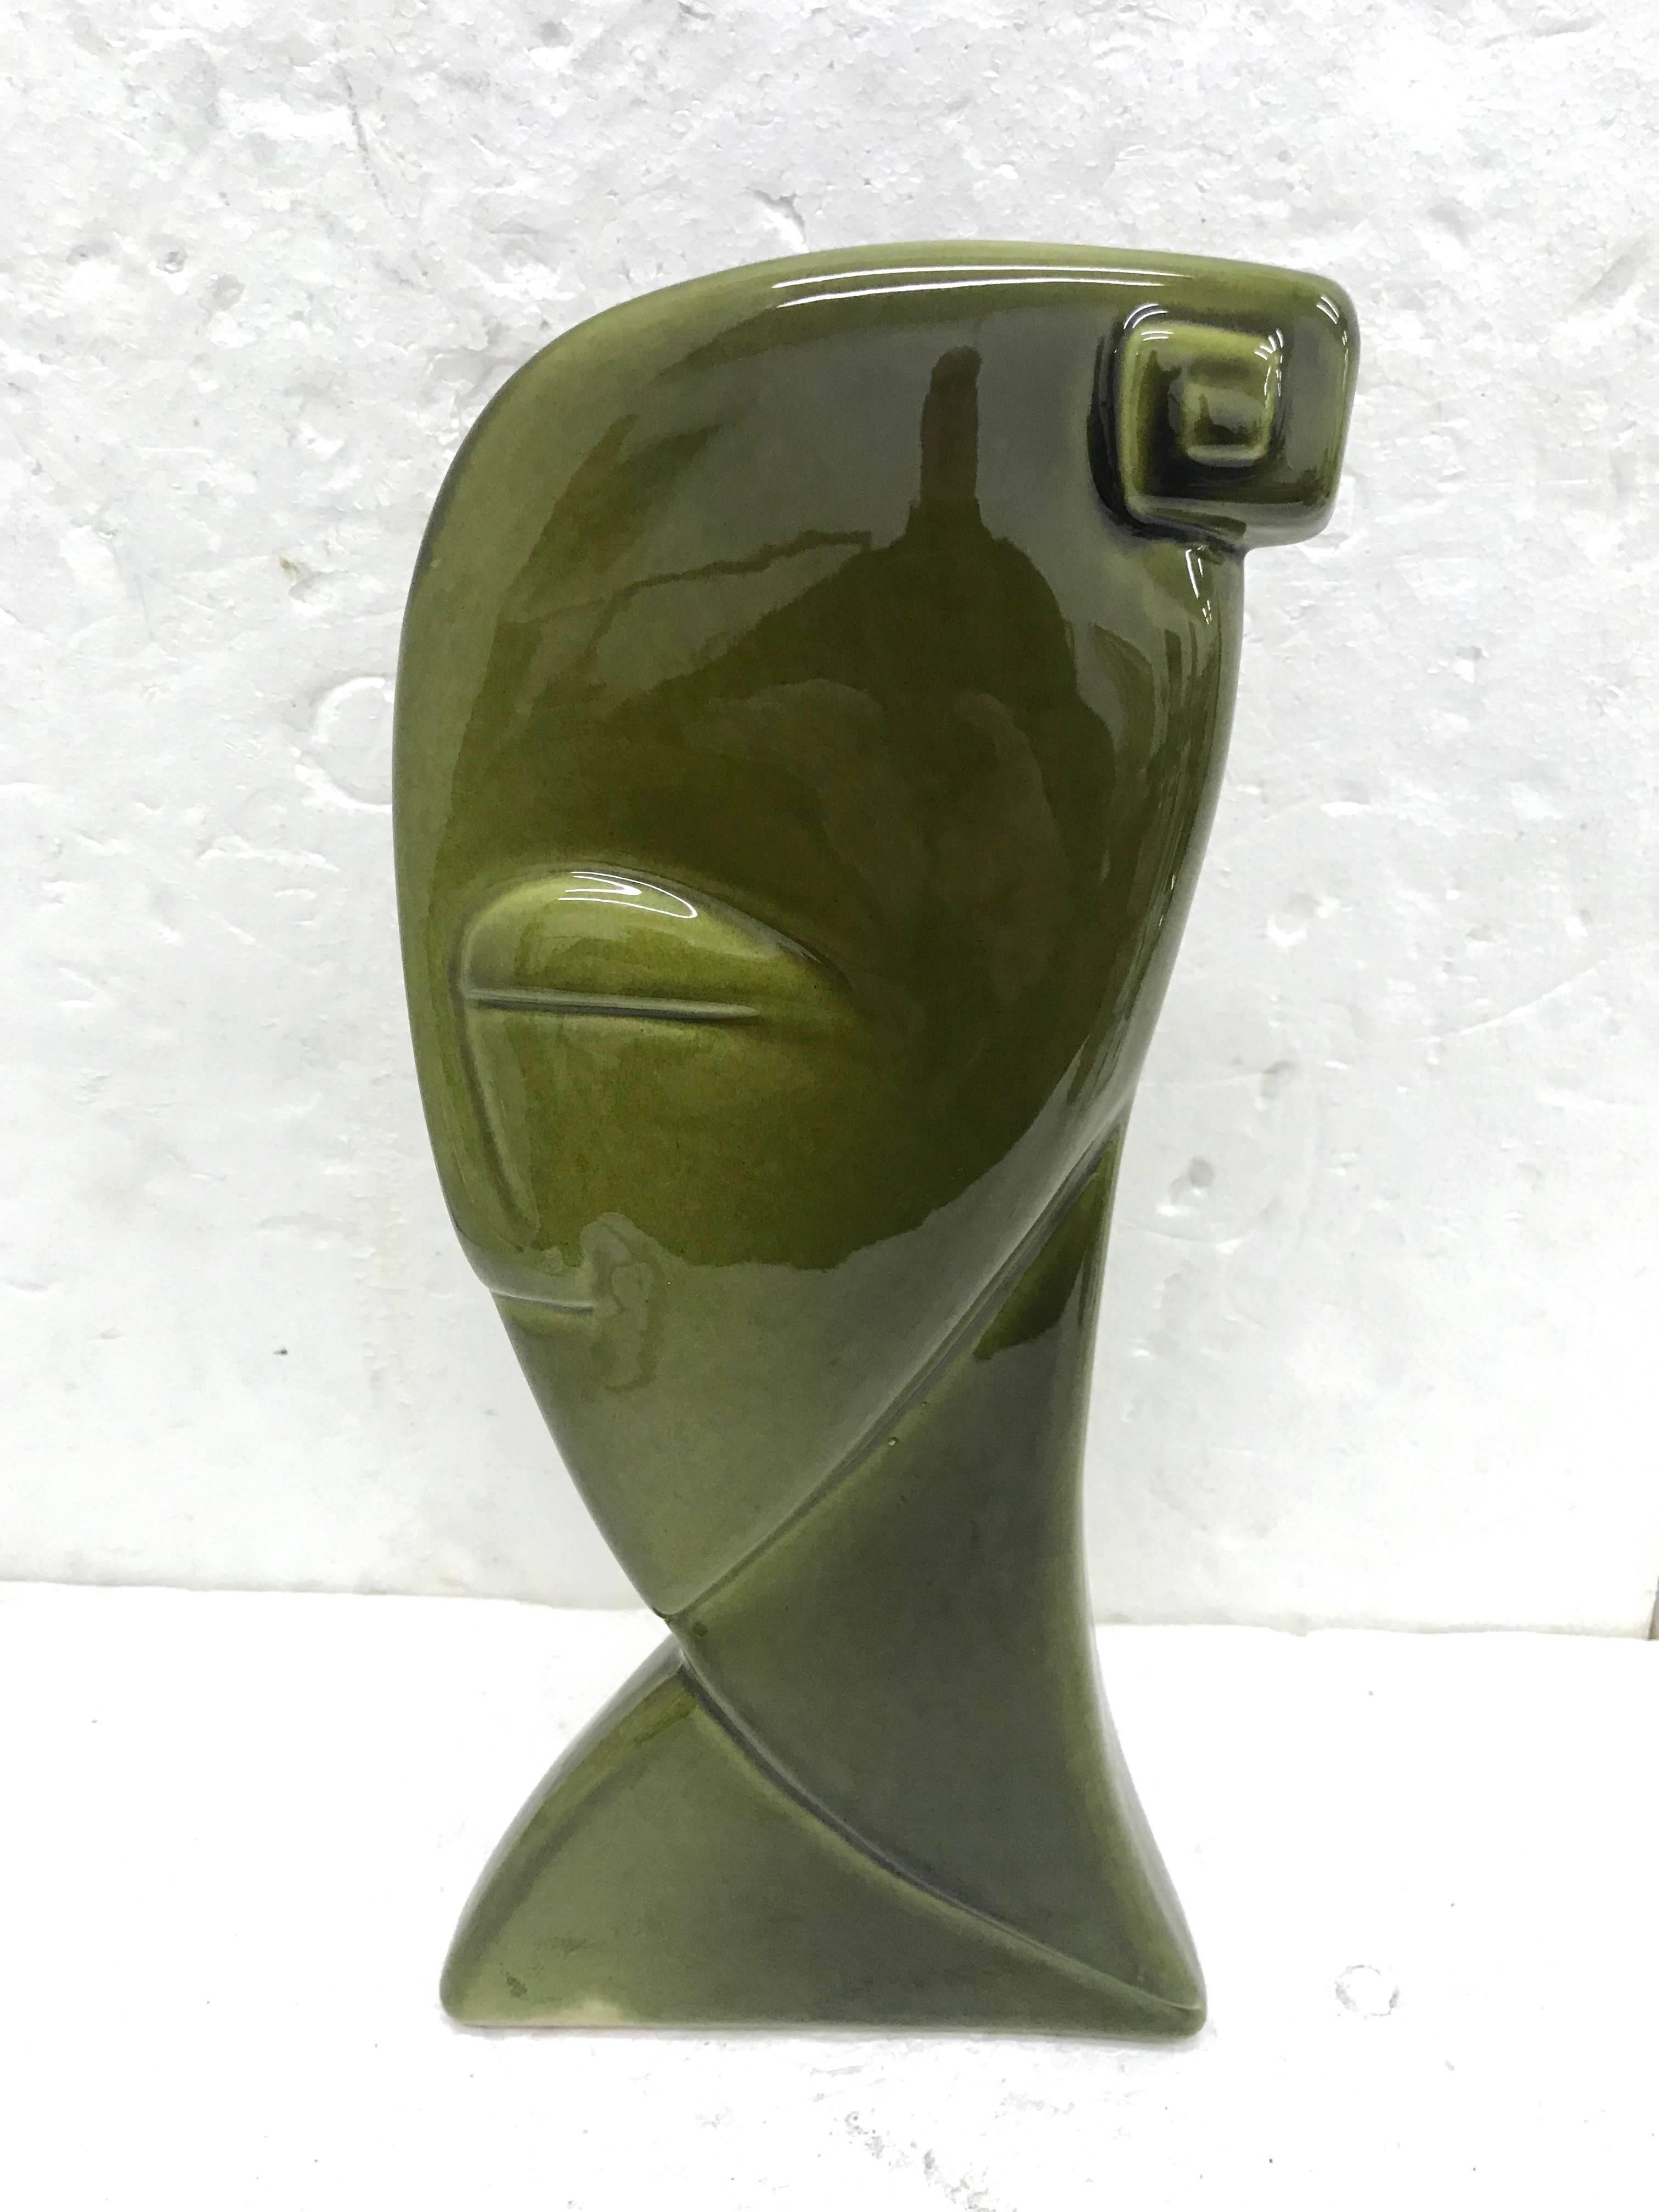 Stylish Art Deco vase by NiederKorn, probably made in Luxembourg, in perfect conditions